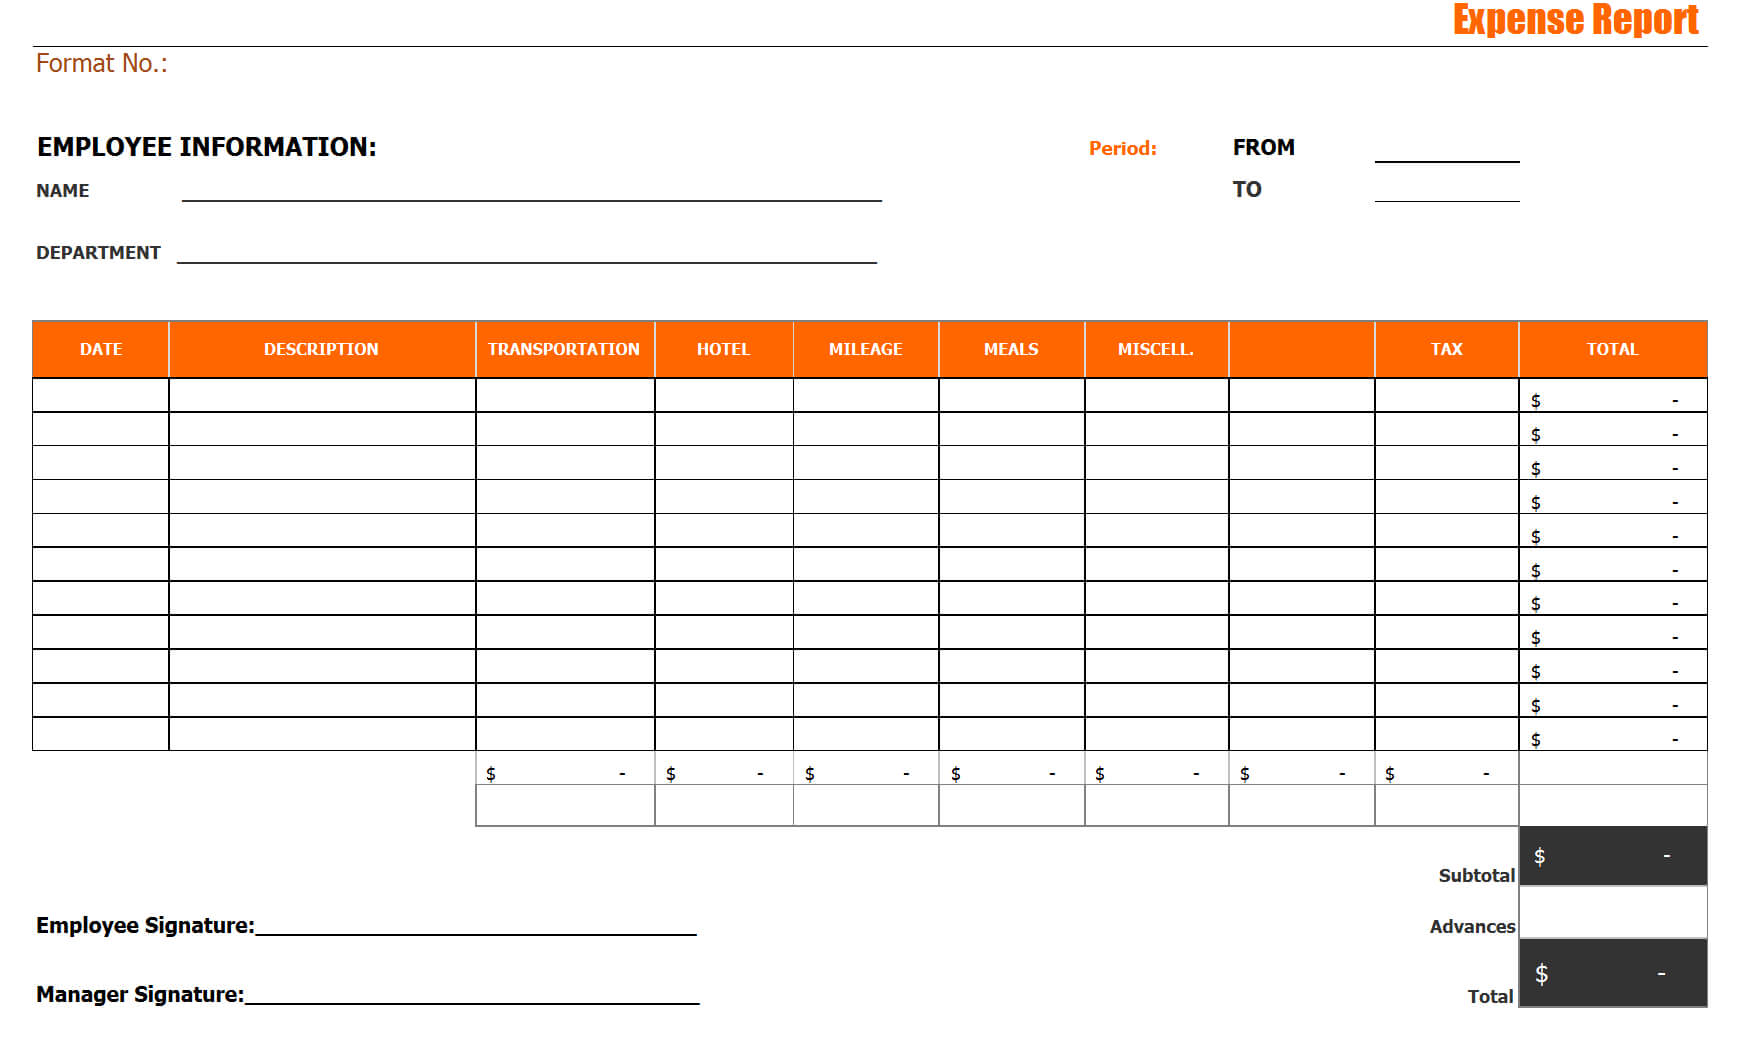 Expense Report – Inside Company Expense Report Template